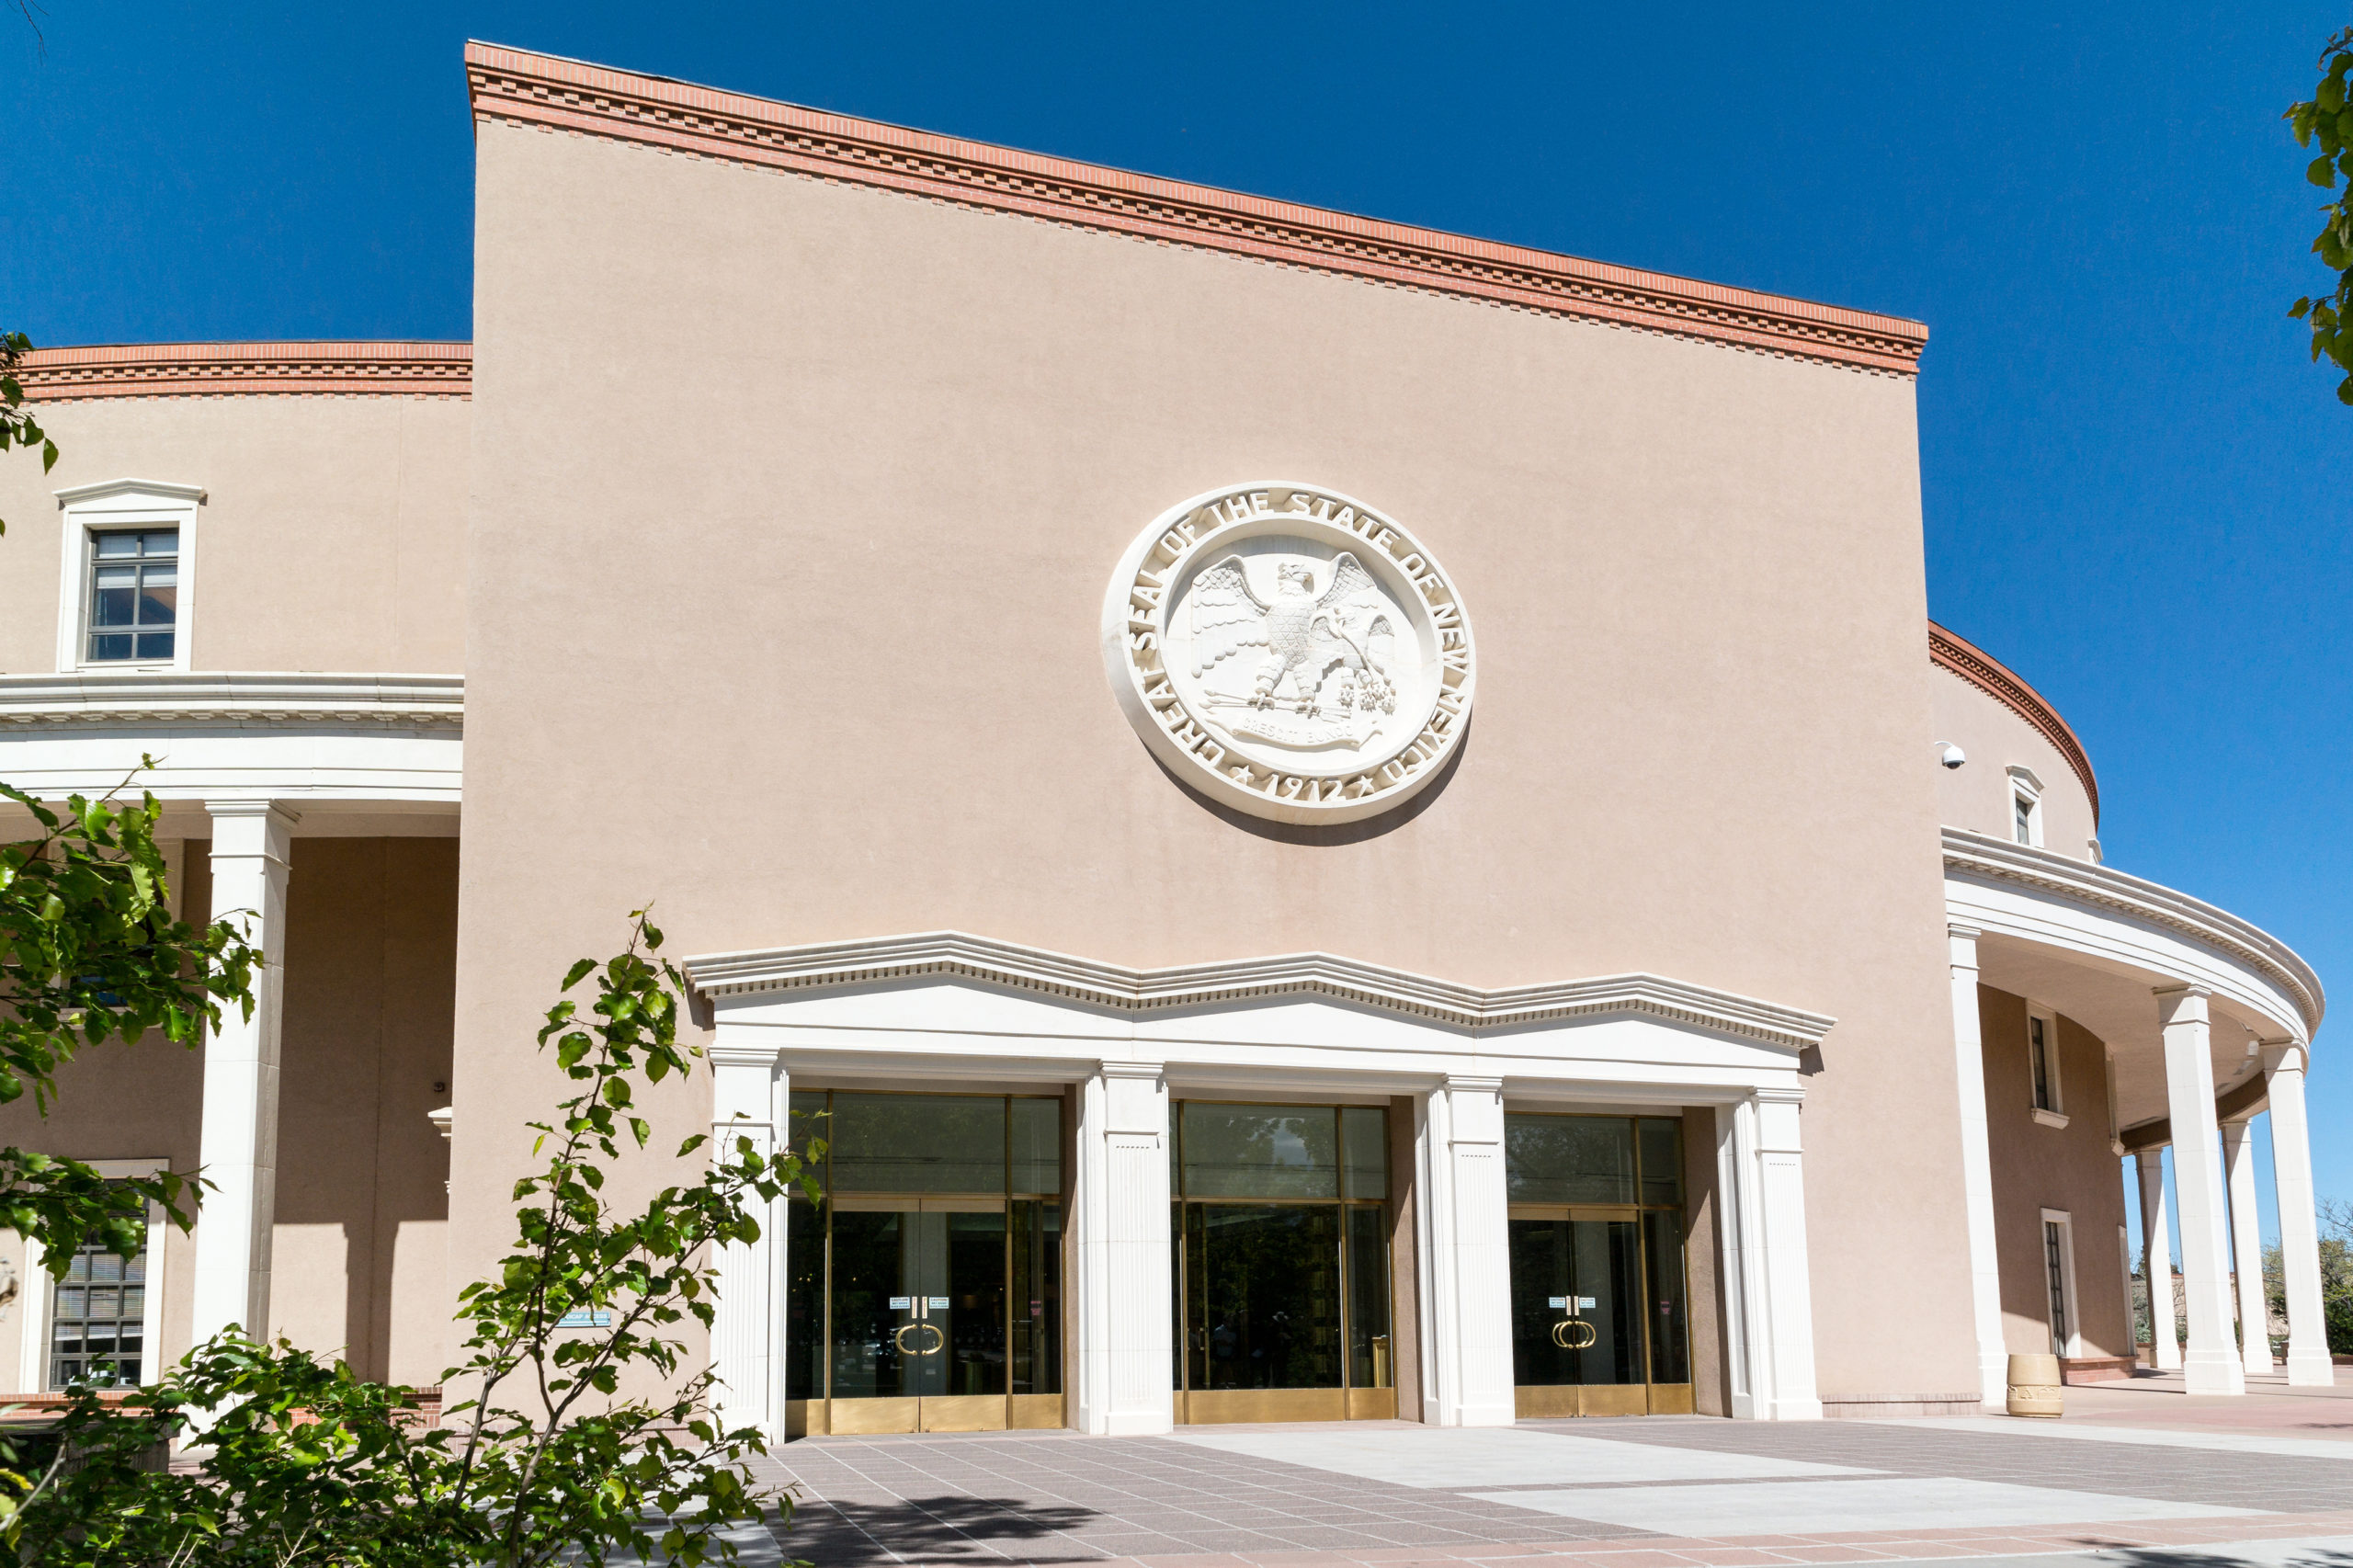 Risk Assessment Shows New Mexico Pension Reform Protects Plan Members and Taxpayers